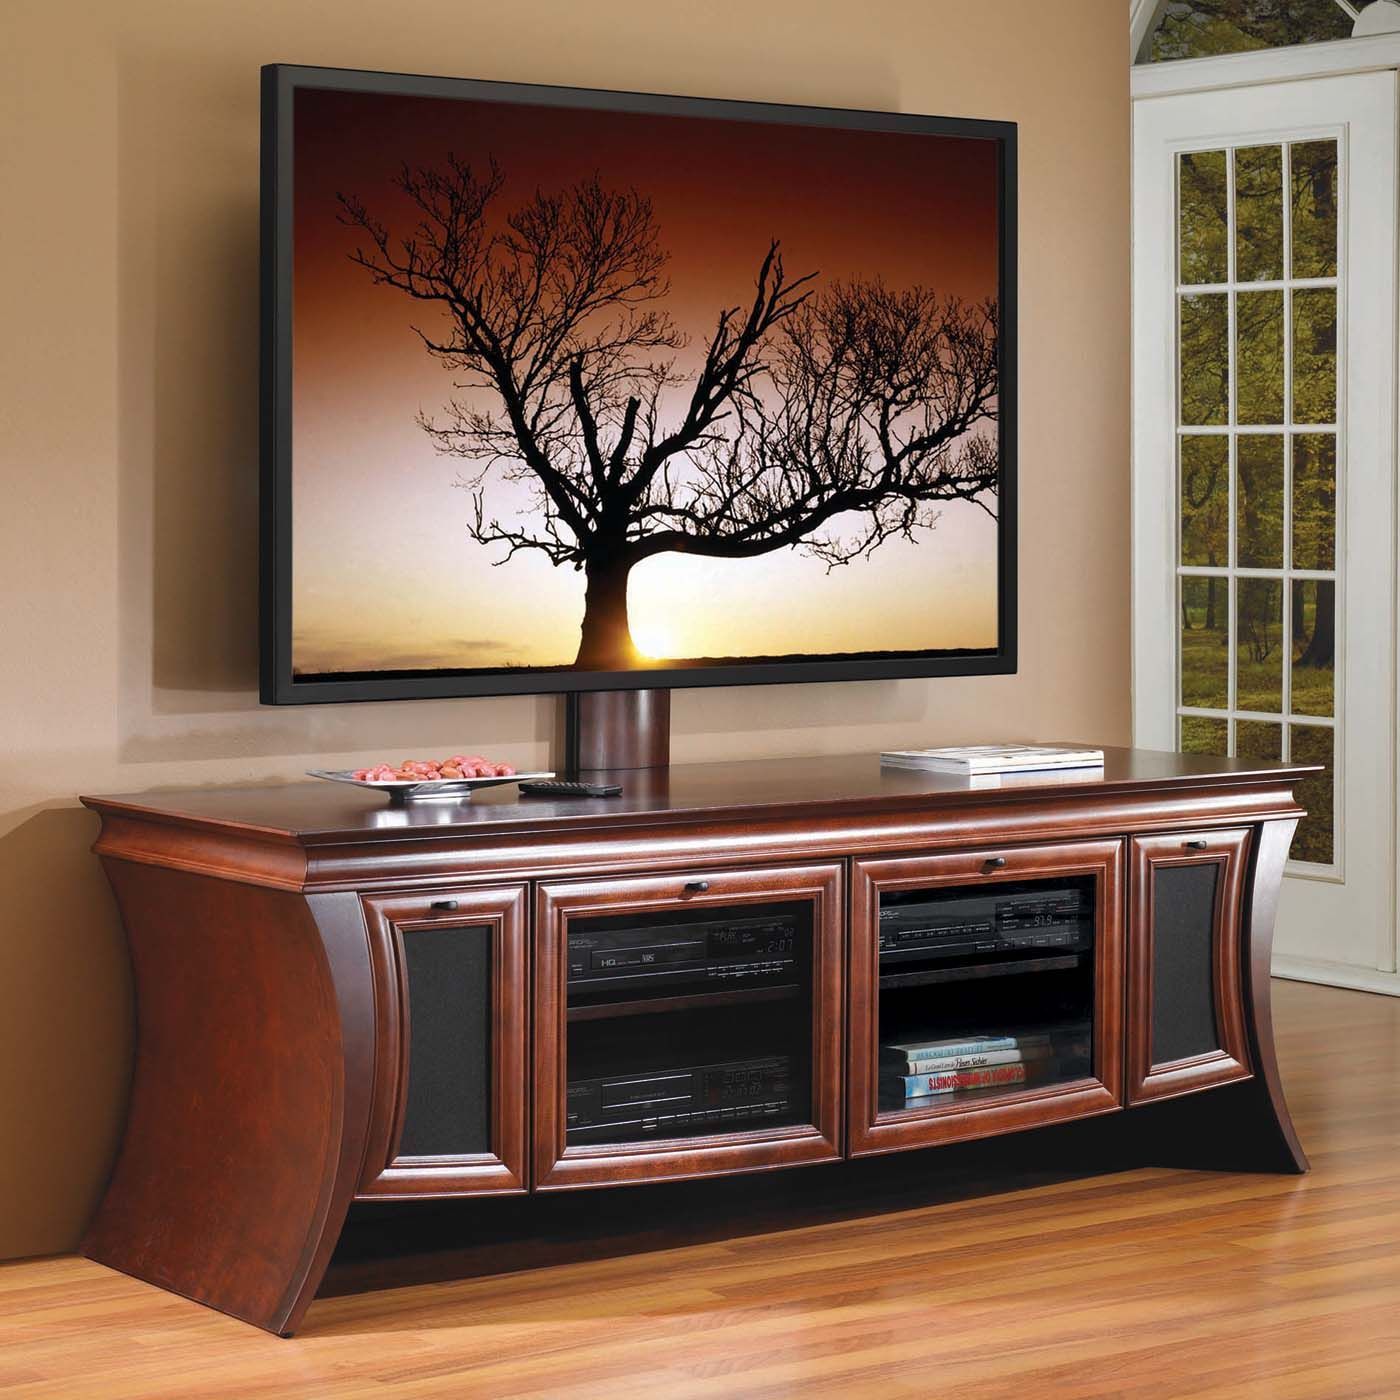 Jsp Furniture Flat Screen Mount | Tv Stand Furniture With Oak Tv Cabinets For Flat Screens (Photo 1 of 12)